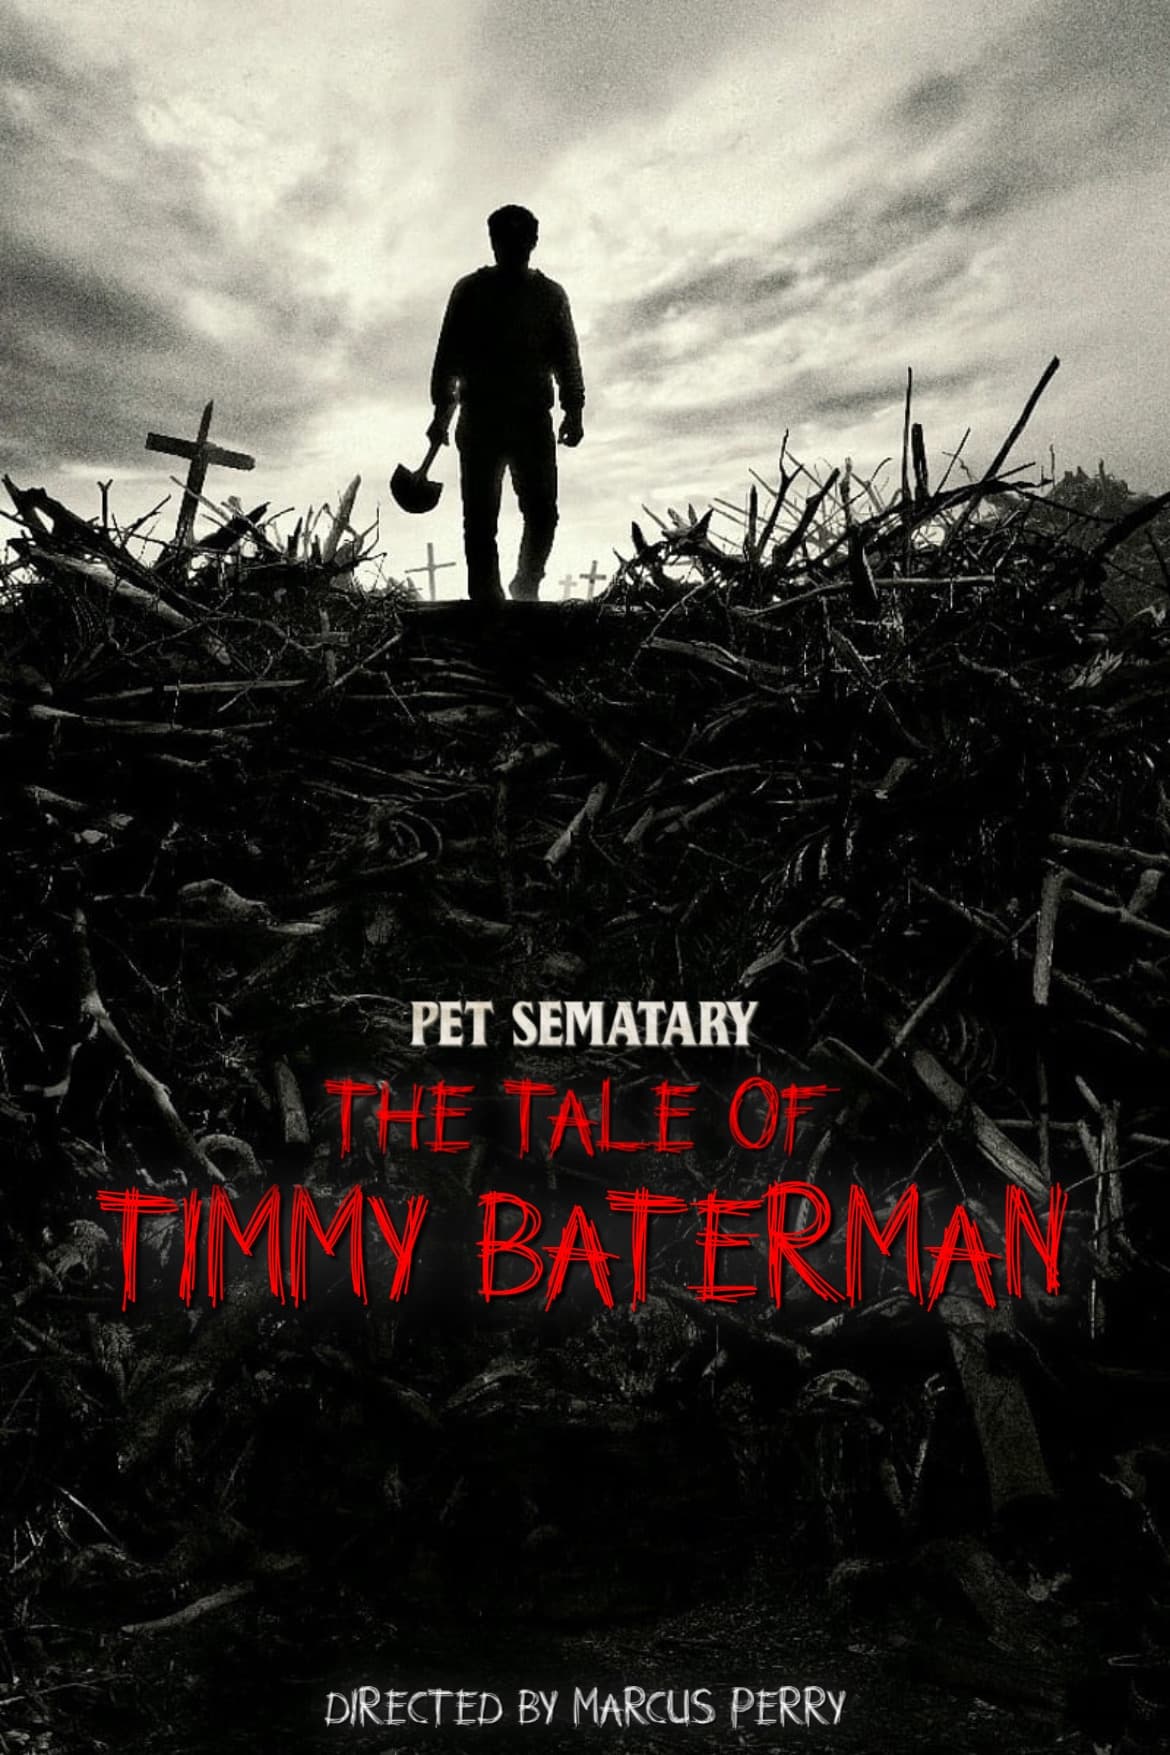 Pet Sematary: The Tale of Timmy Baterman